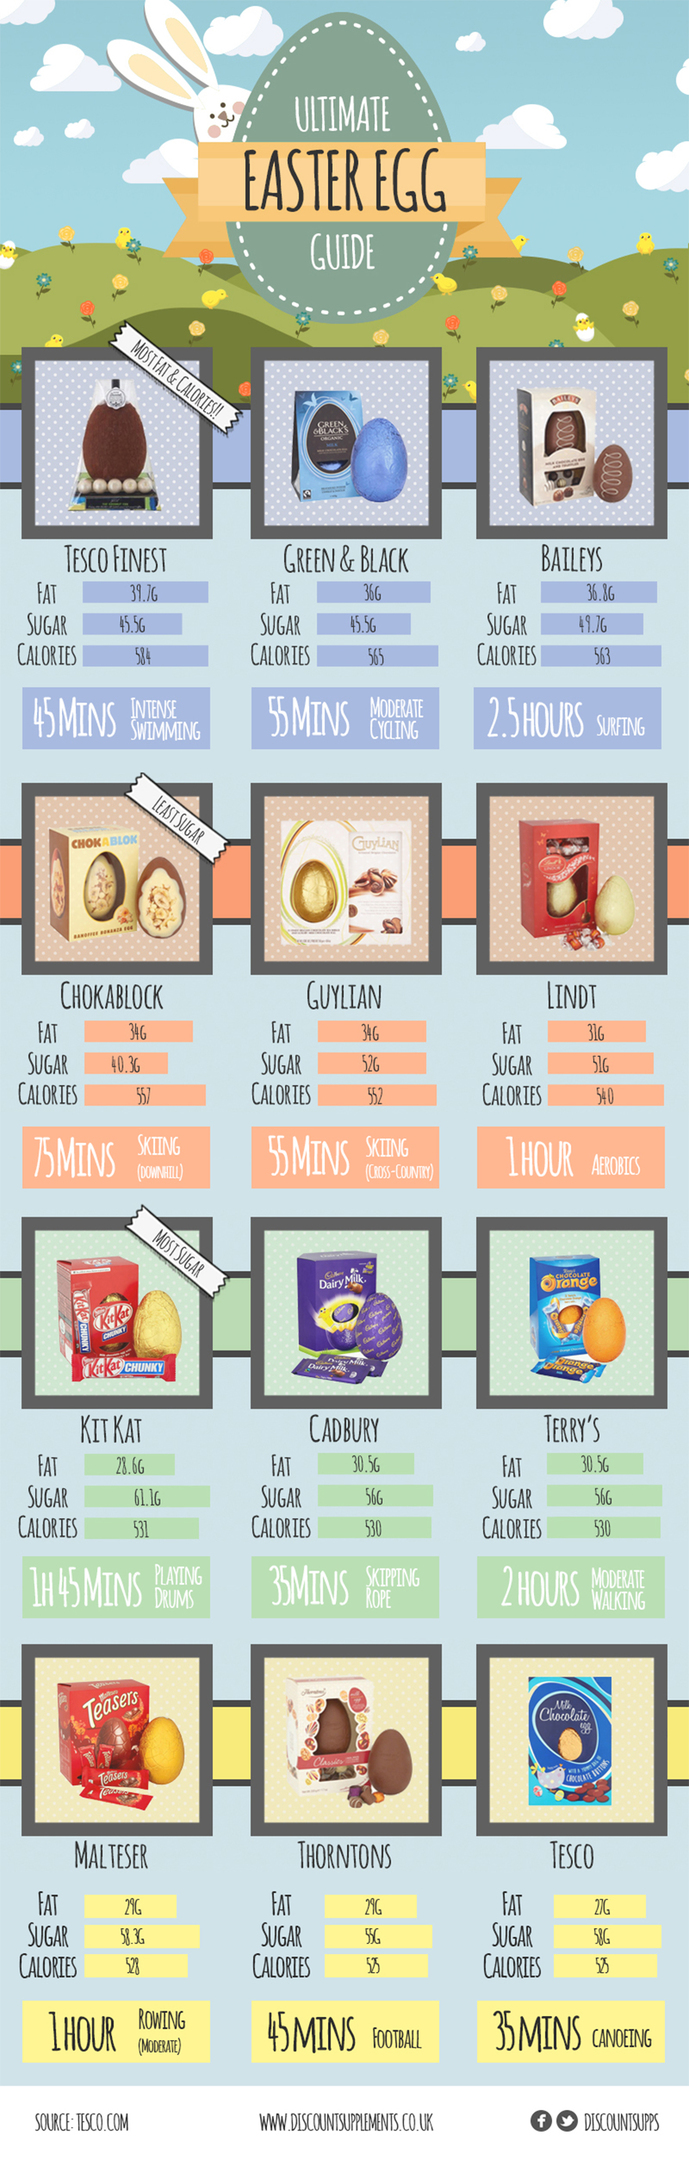 Infographic of 12 chocolate Easter eggs with time taken to work off the calories of each